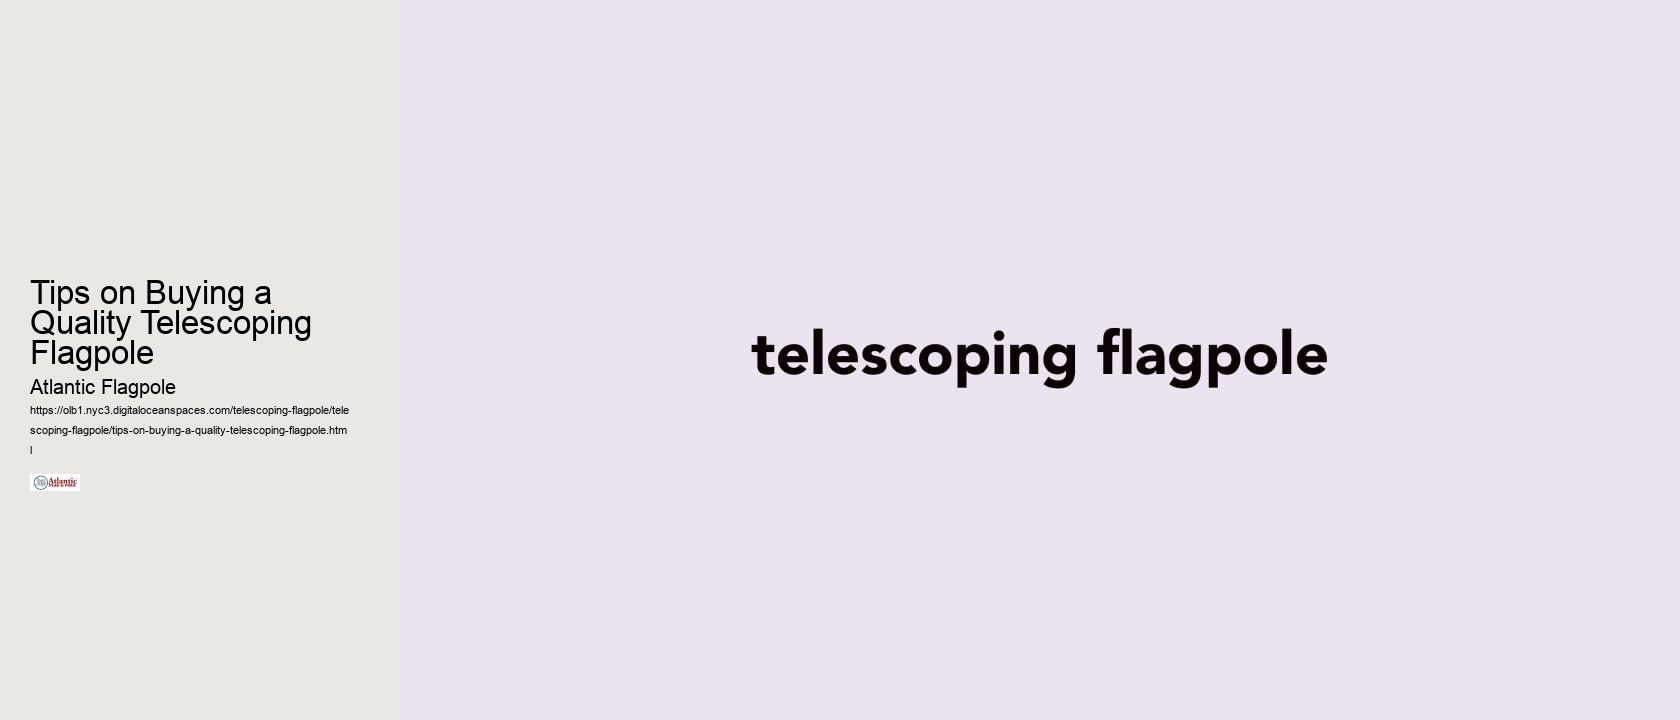 Tips on Buying a Quality Telescoping Flagpole